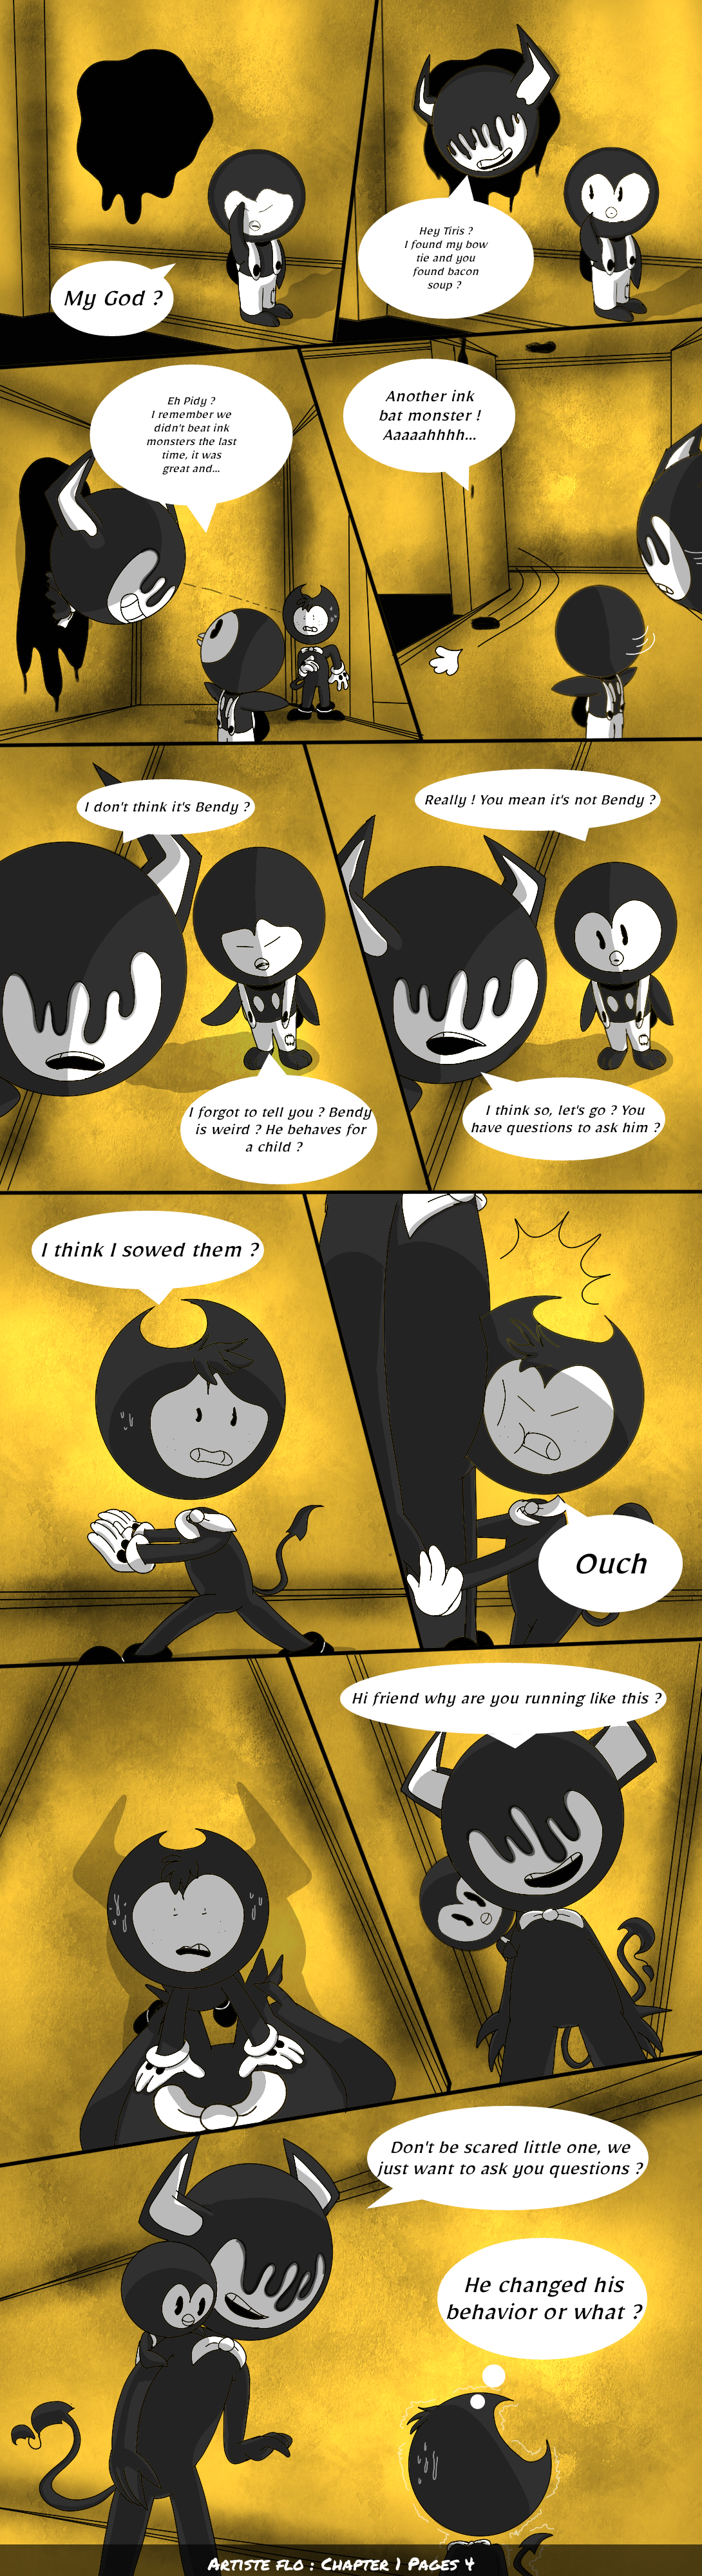 Bendy and the Dark Revival Chapters 1-5